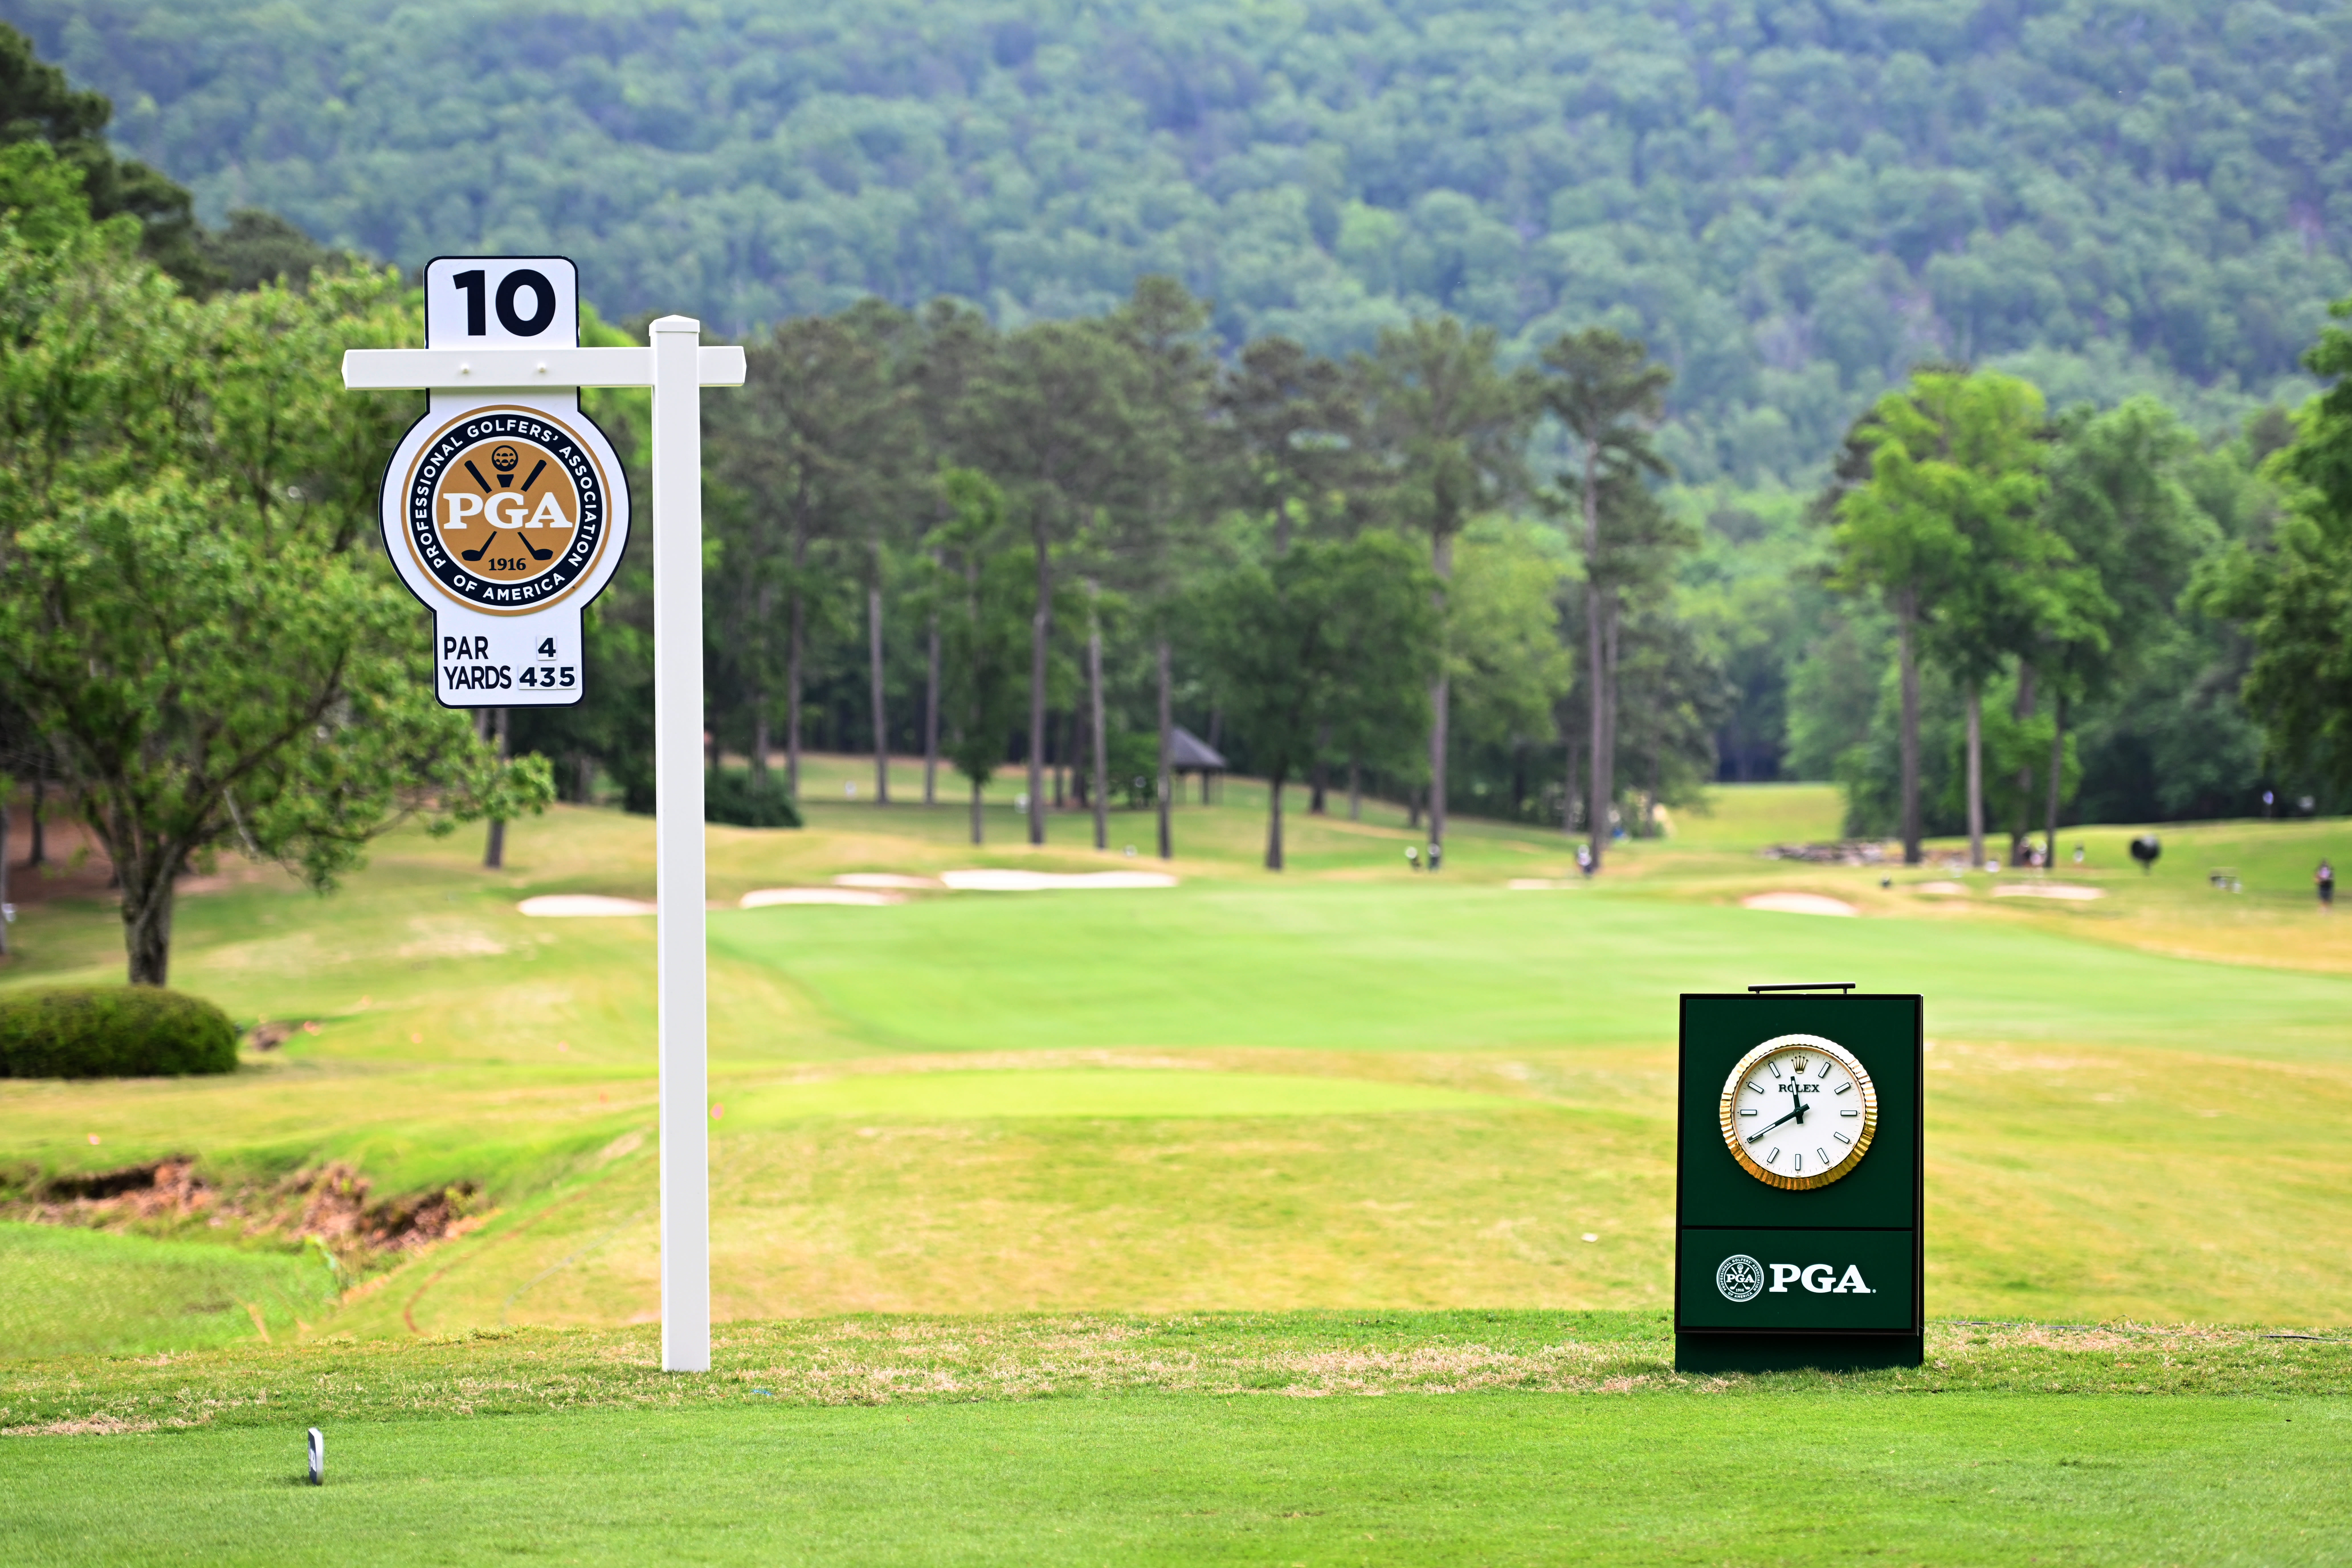 The PGA WORKS Collegiate Championship is being co-hosted at Shoal Creek this week.